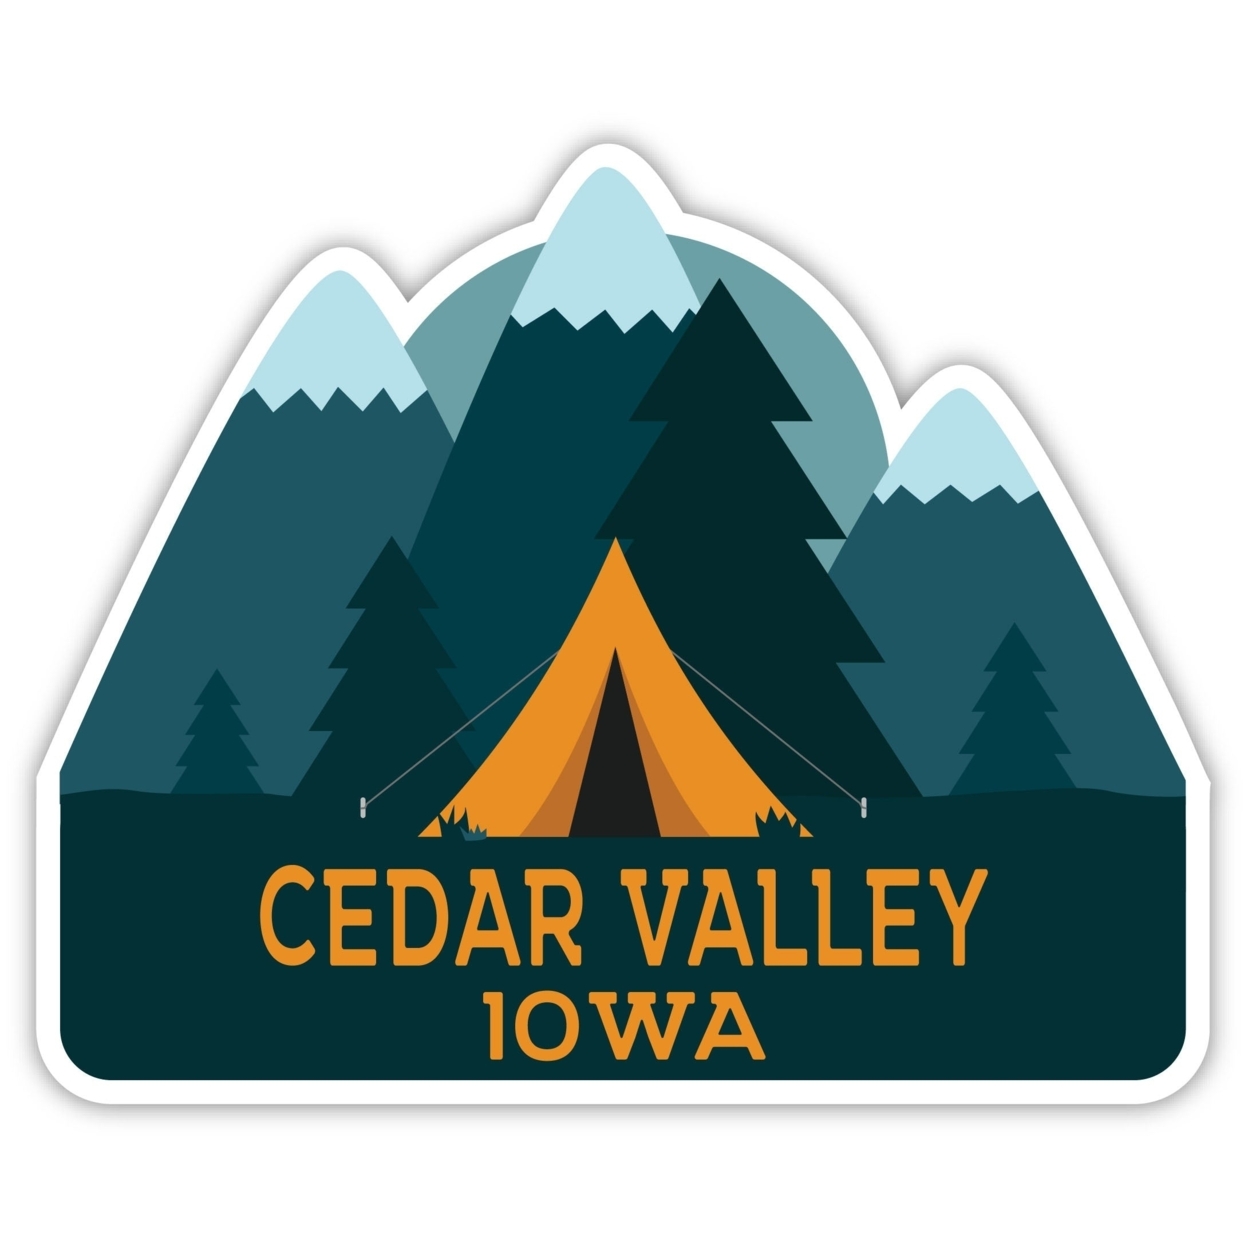 Cedar Valley Iowa Souvenir Decorative Stickers (Choose Theme And Size) - 4-Pack, 2-Inch, Tent